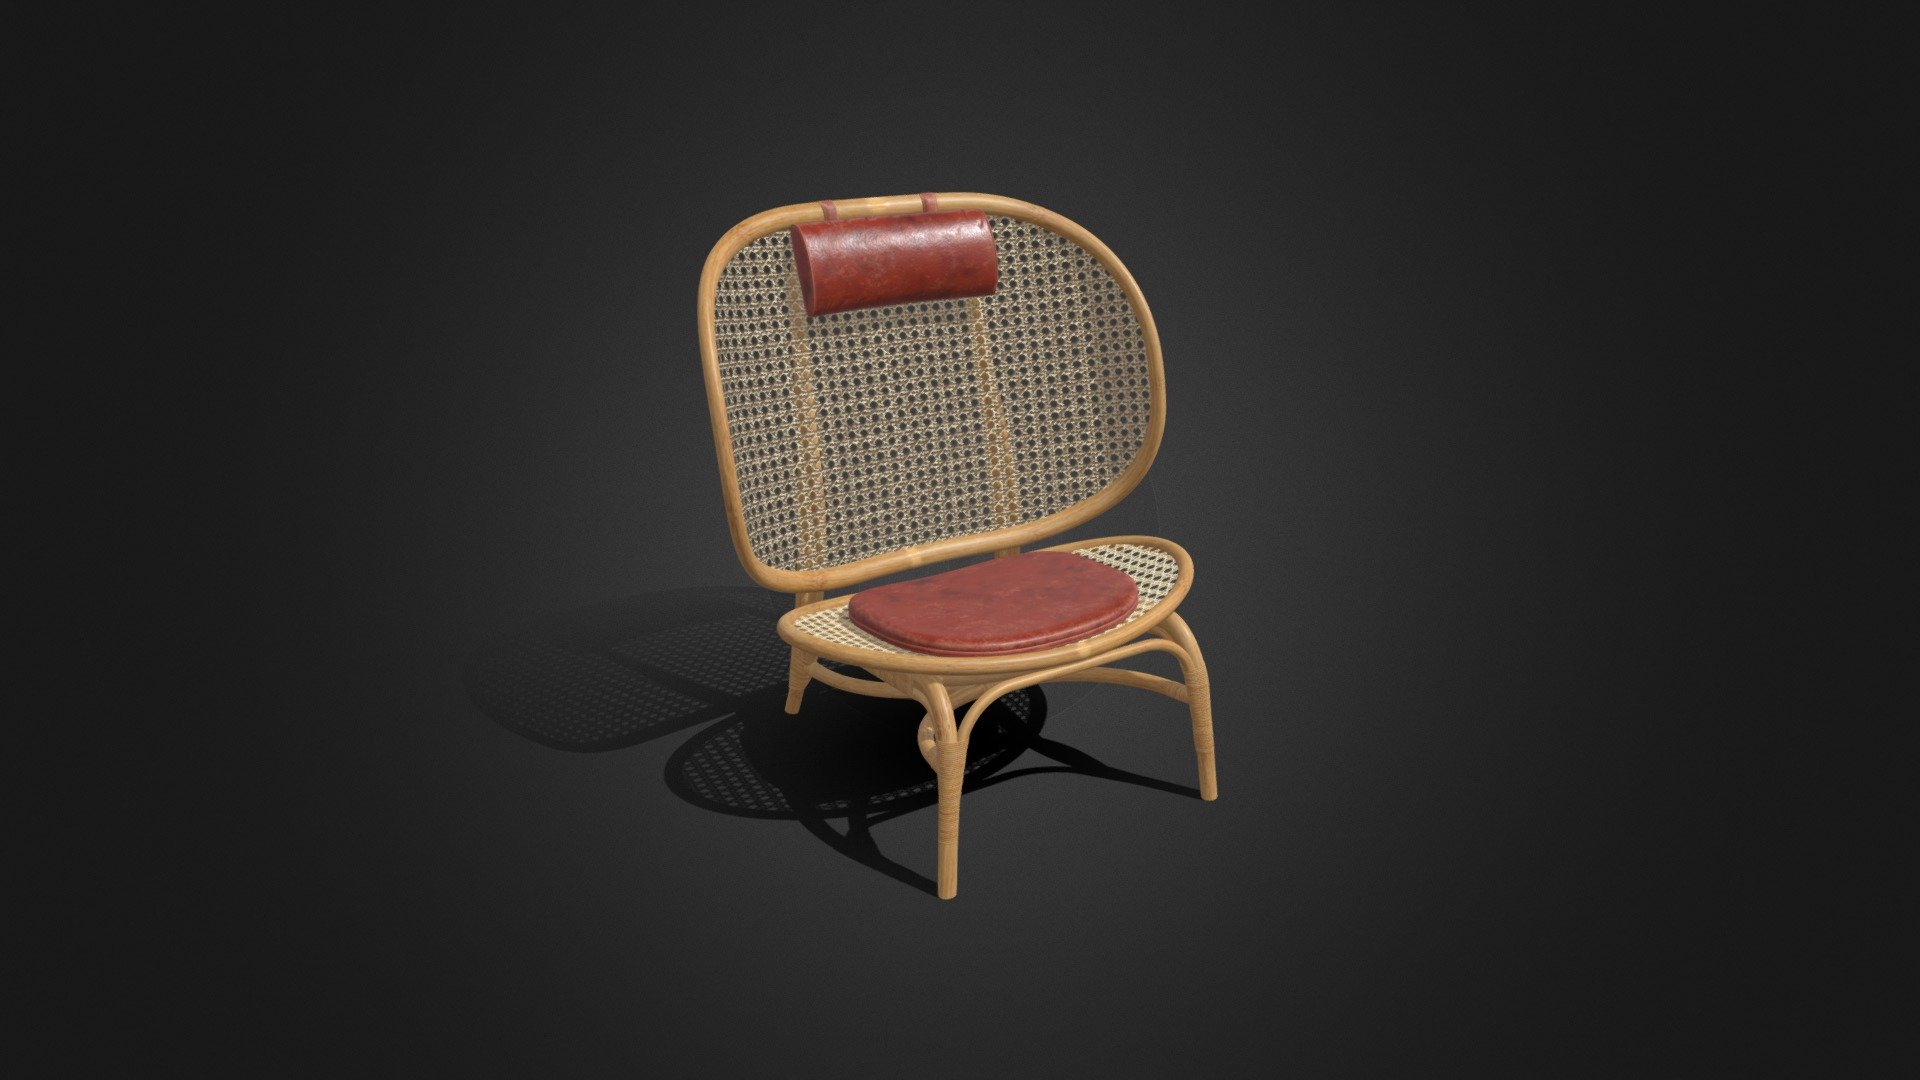 3d model of a Nomad Chair. (PBR texture )

This product is made in Blender and ready to render in Cycle. Unit setup is metres and the models are scaled to match real life objects. 

The model comes with textures and materials and is positioned in the center of the coordinates system.


No additional plugin is needed to open the model.




Notes:



Geometry: Polygonal

Textures: Yes 

Rigged: No

Animated: No

UV Mapped: Yes

Unwrapped UVs: Yes, non-overlapping


Bake normal map




Note: don't forget to take a few seconds to rate this product, your support will allow me to continue working .
Thanks in advance for your help and happy blending!




Hope you like it! Thank you!



My youtube channel : https://www.youtube.com/toss90 - Nomad Chair - Buy Royalty Free 3D model by Toss90 3d model